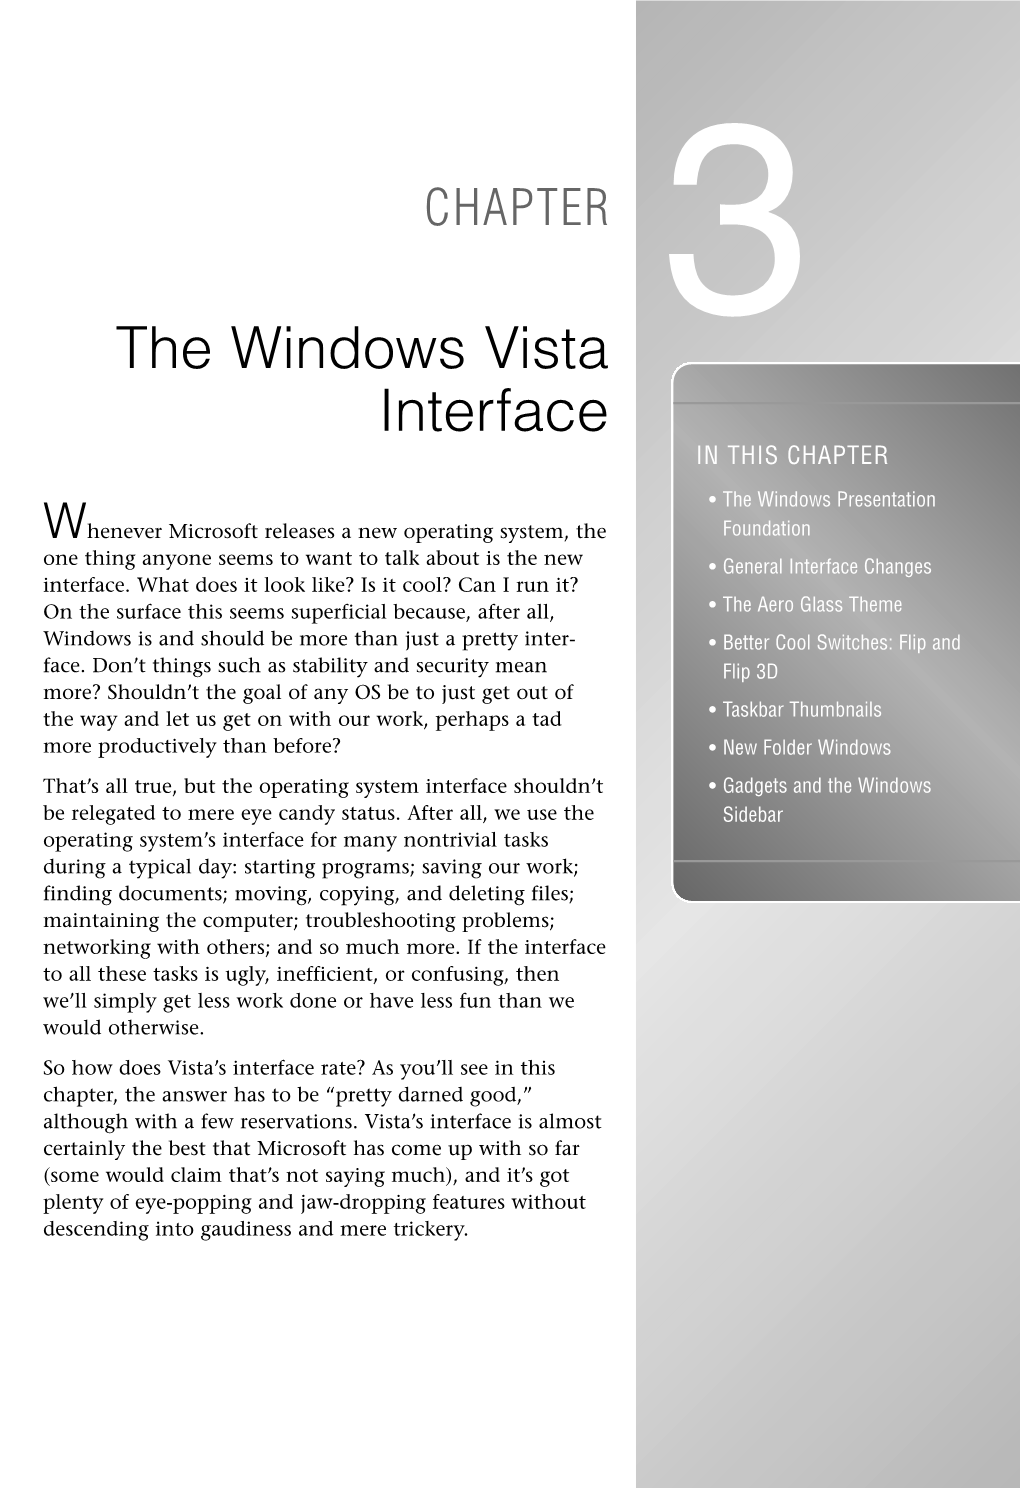 The Windows Vista Interface in THIS CHAPTER